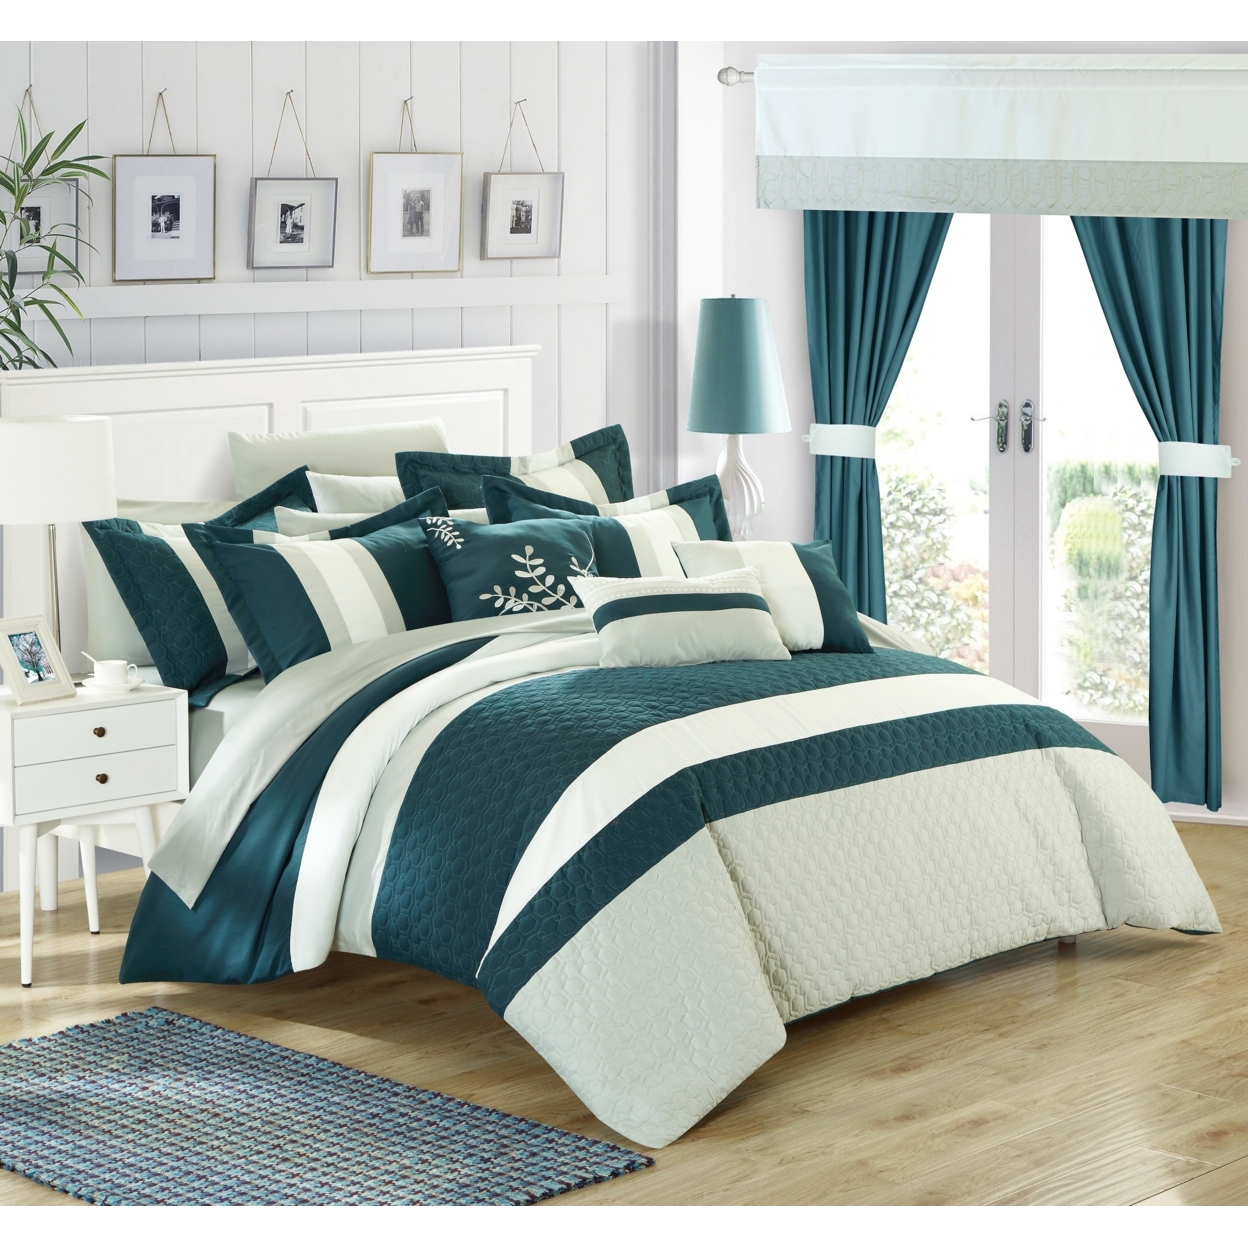 Chic Home 24 Piece Placido Complete Bedroom Set With Octagon Embroidery Color Block Pattern - Grey, King